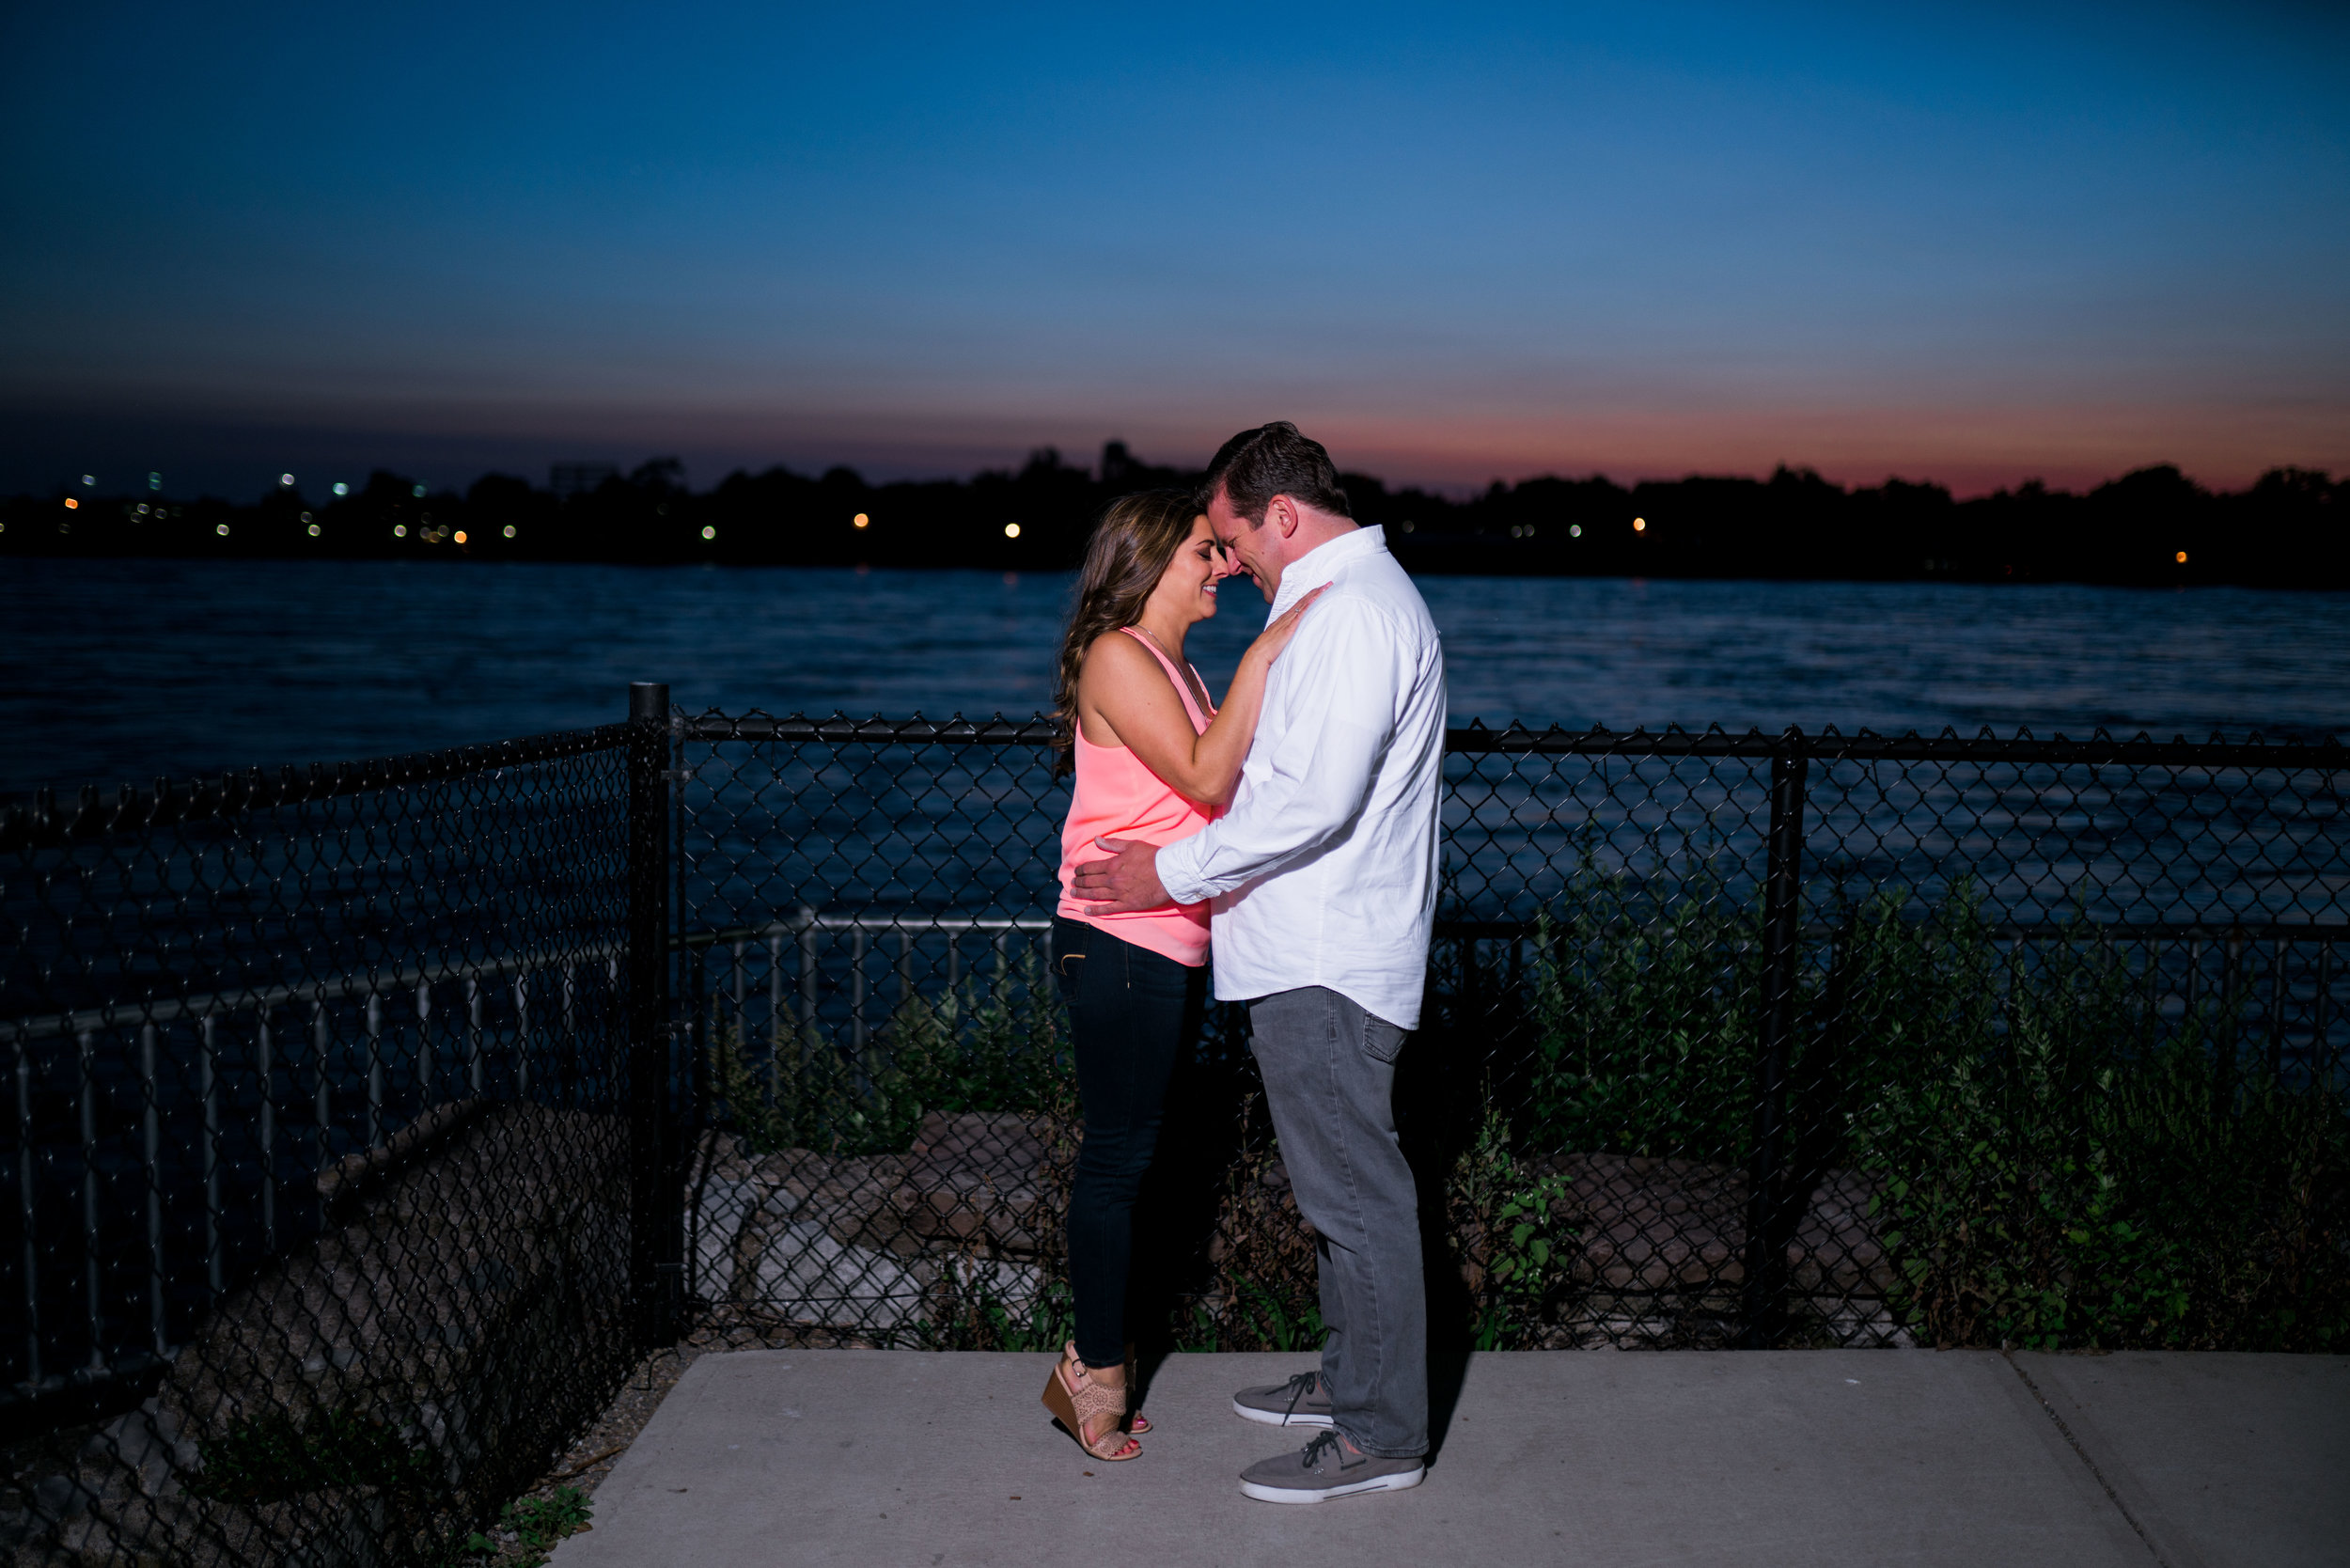 Nancy and David Engagement Photography by Stefan Ludwig in Buffalo NY-37.jpg